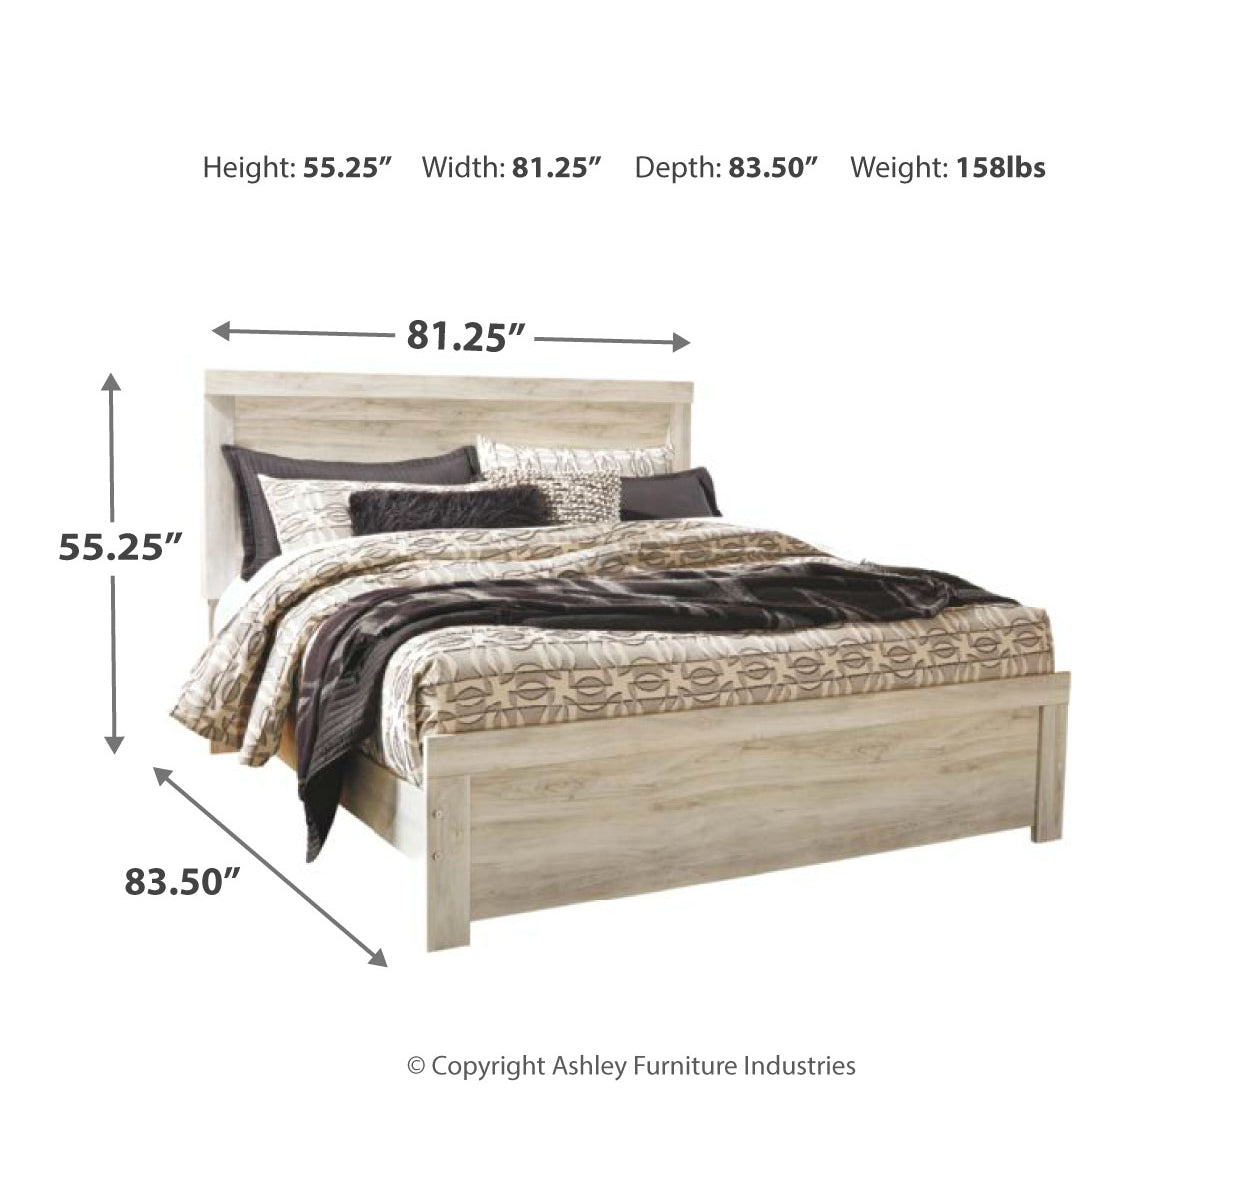 Bellaby King Panel Bed